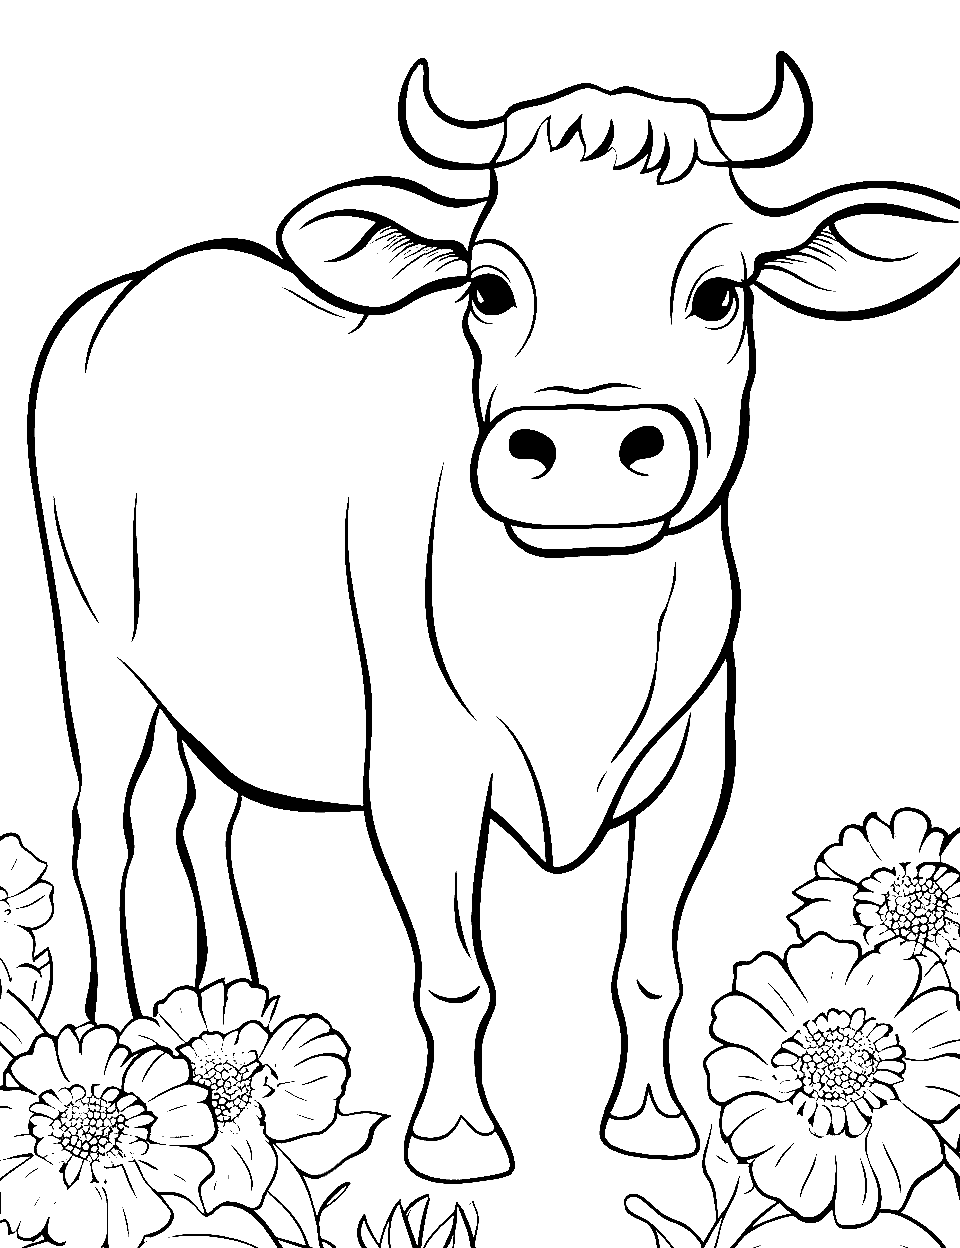 Sunflower and the Grazing Bovine Coloring Page - A cow peacefully grazing near sunflowers.